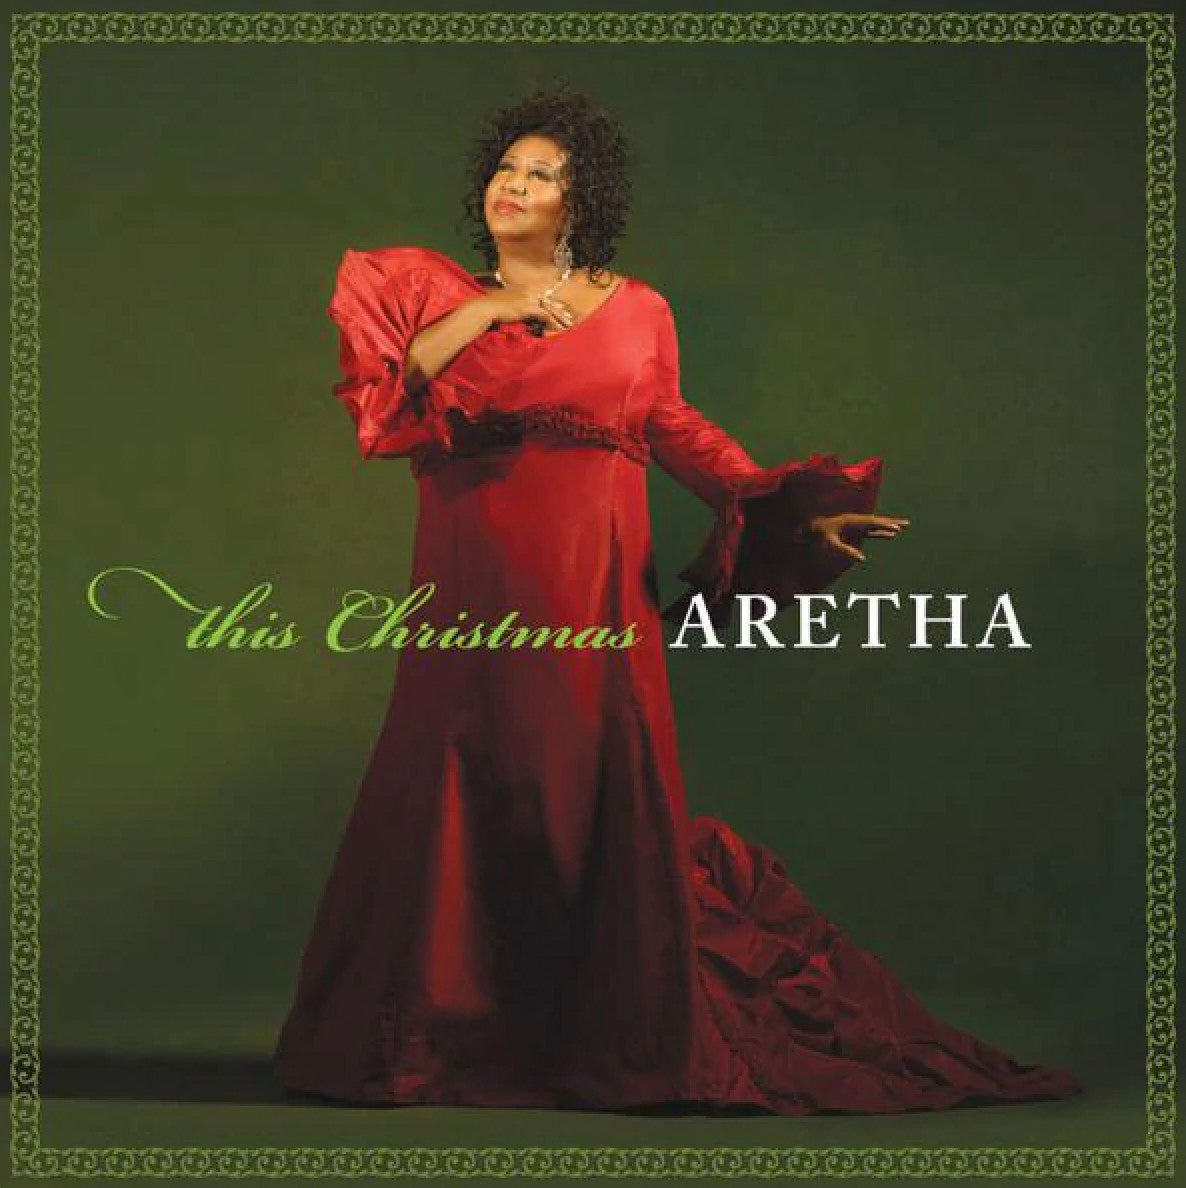 Aretha Franklin- This Christmas (Indie Exclusive) - Darkside Records